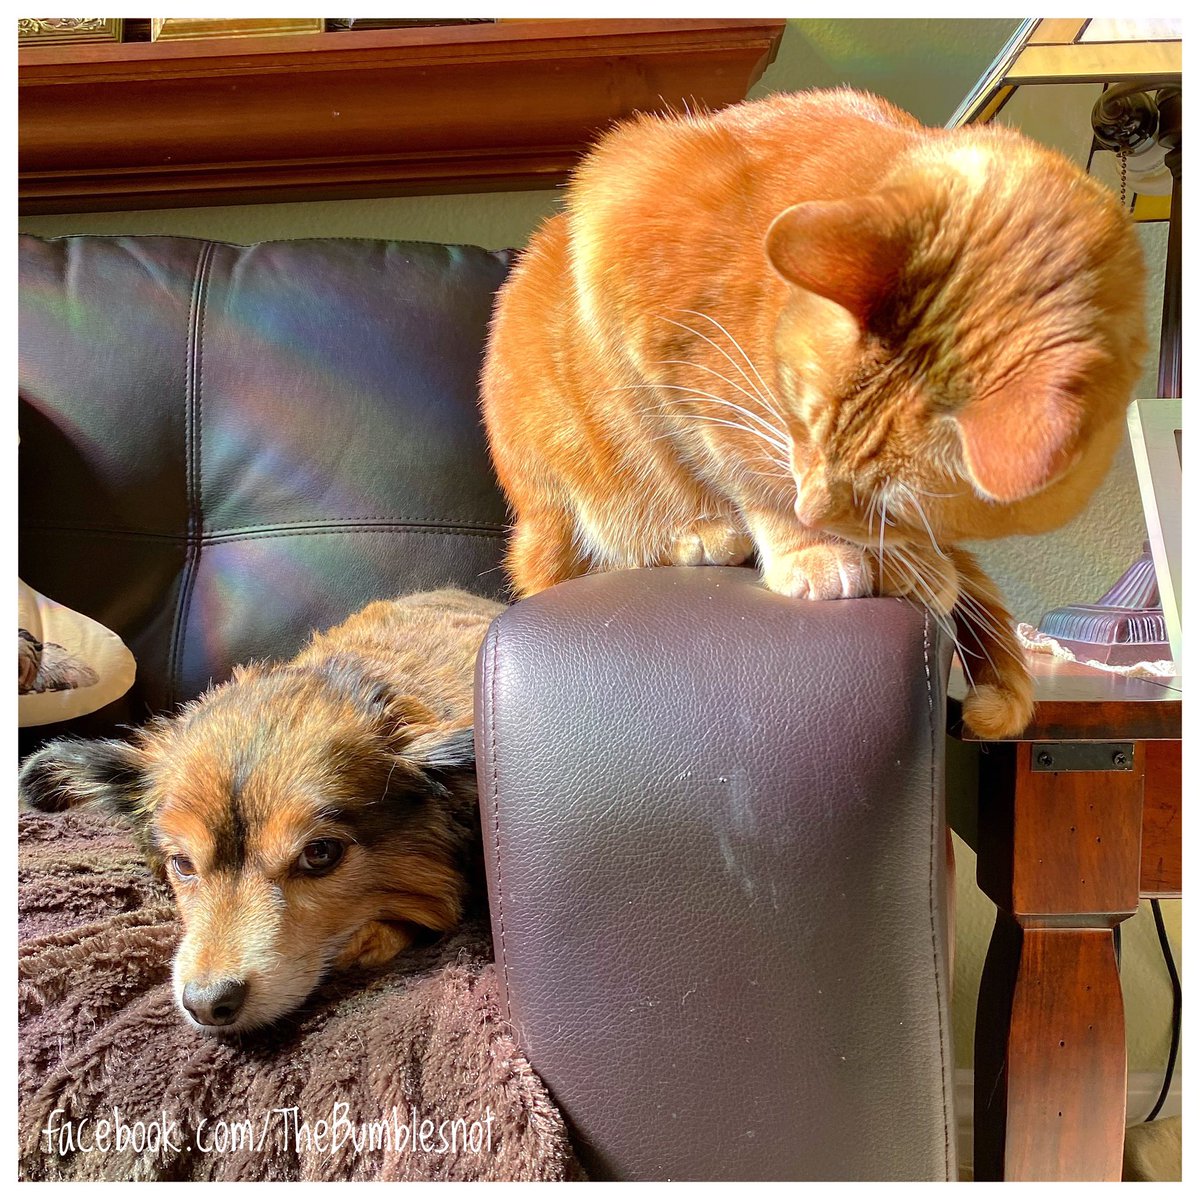 Hey Brown Doggy..! Wut happens to youse? Youse looky likey youse loose sum hairs dere. Where dey go? 🐈🧡🐶✂️ #youseskinnyboynow #ihafgotsmorehairydenyouse #haha #butistilllubsyouse #brothers #catsanddogs #catlove #chiweenielove #felinefriday